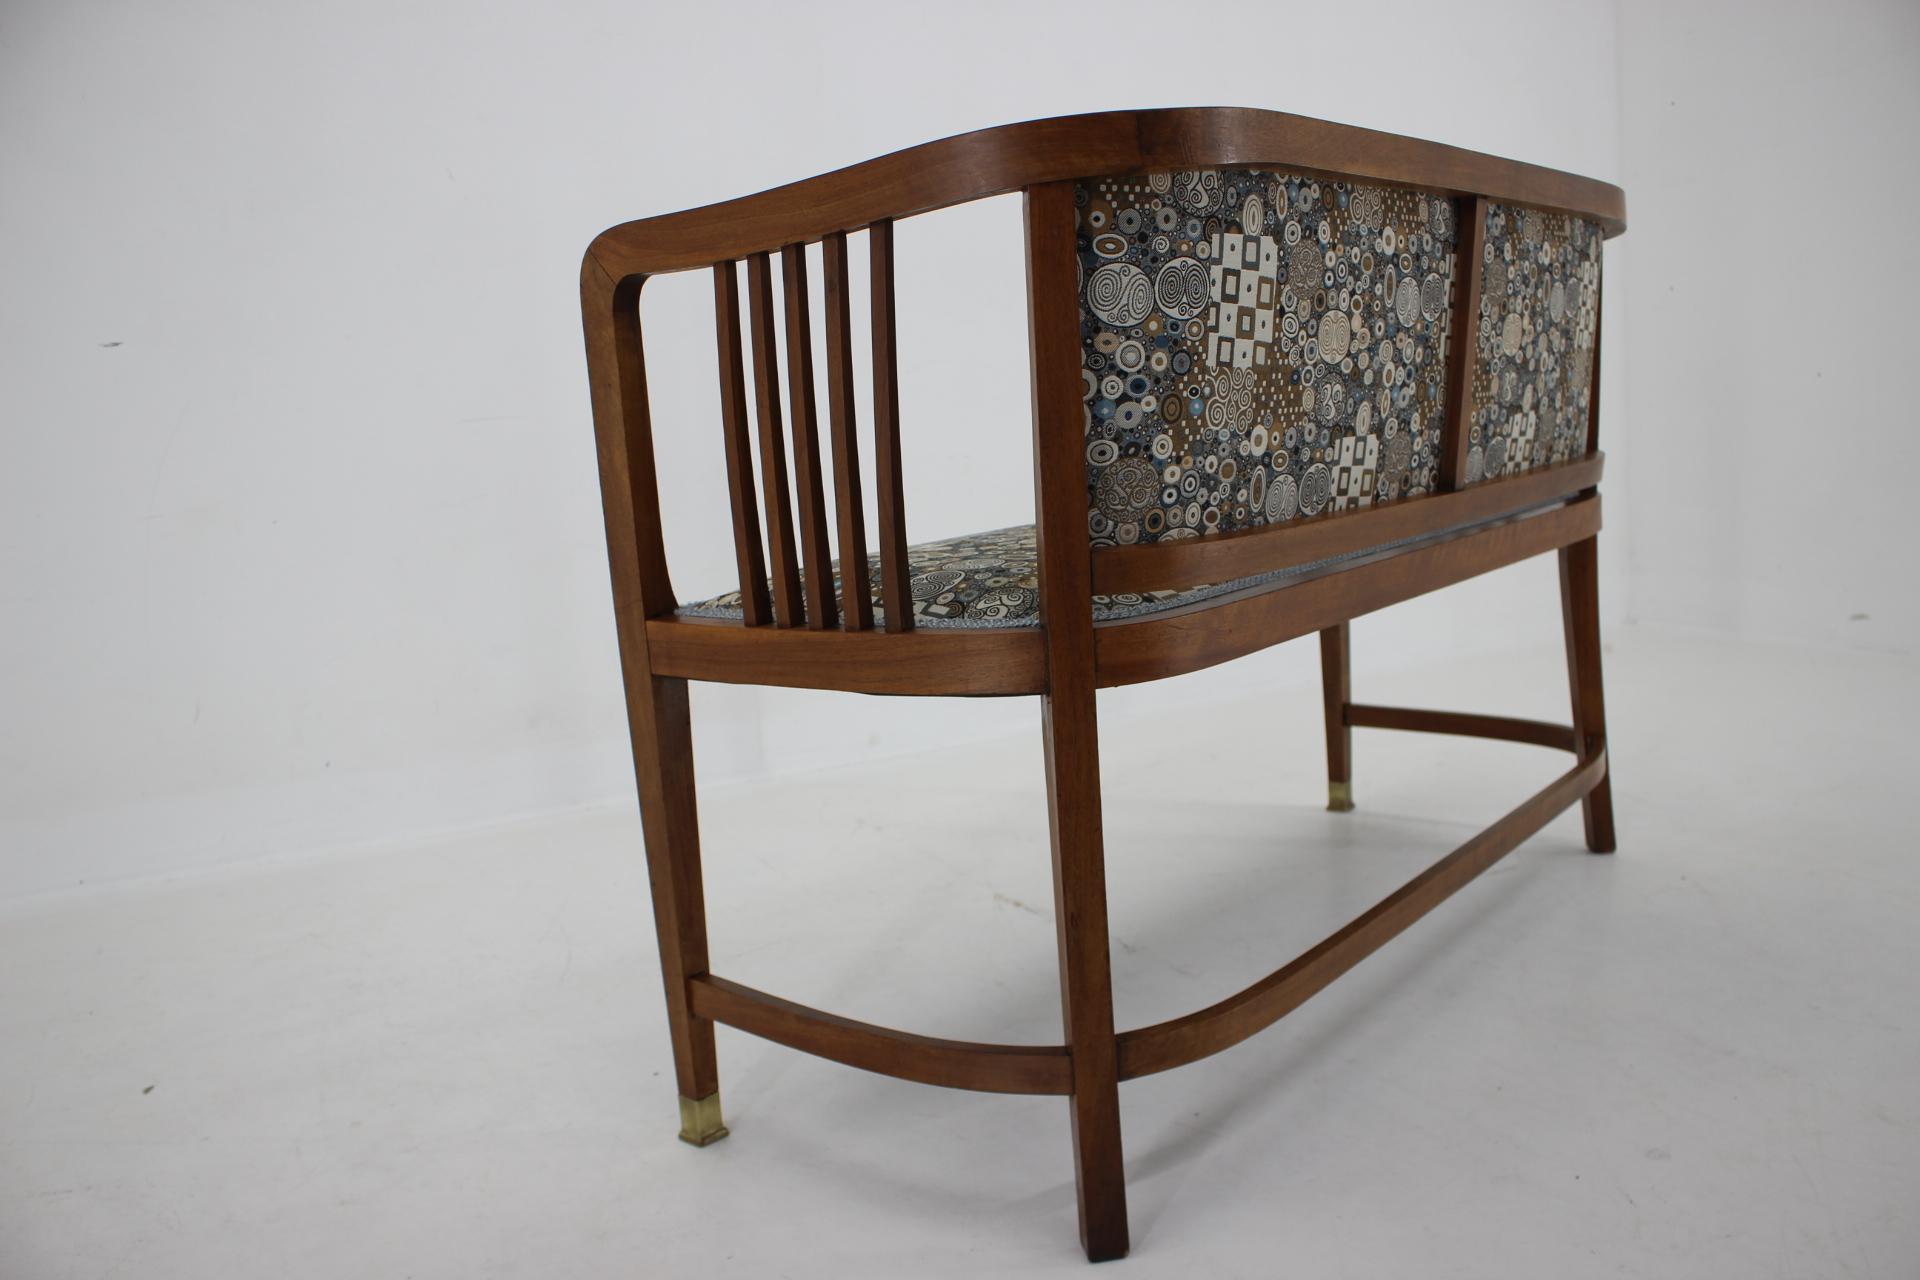 Early 20th Century 1900s Viennese Secession Sofa in the Style of Josef Maria Olbrich For Sale